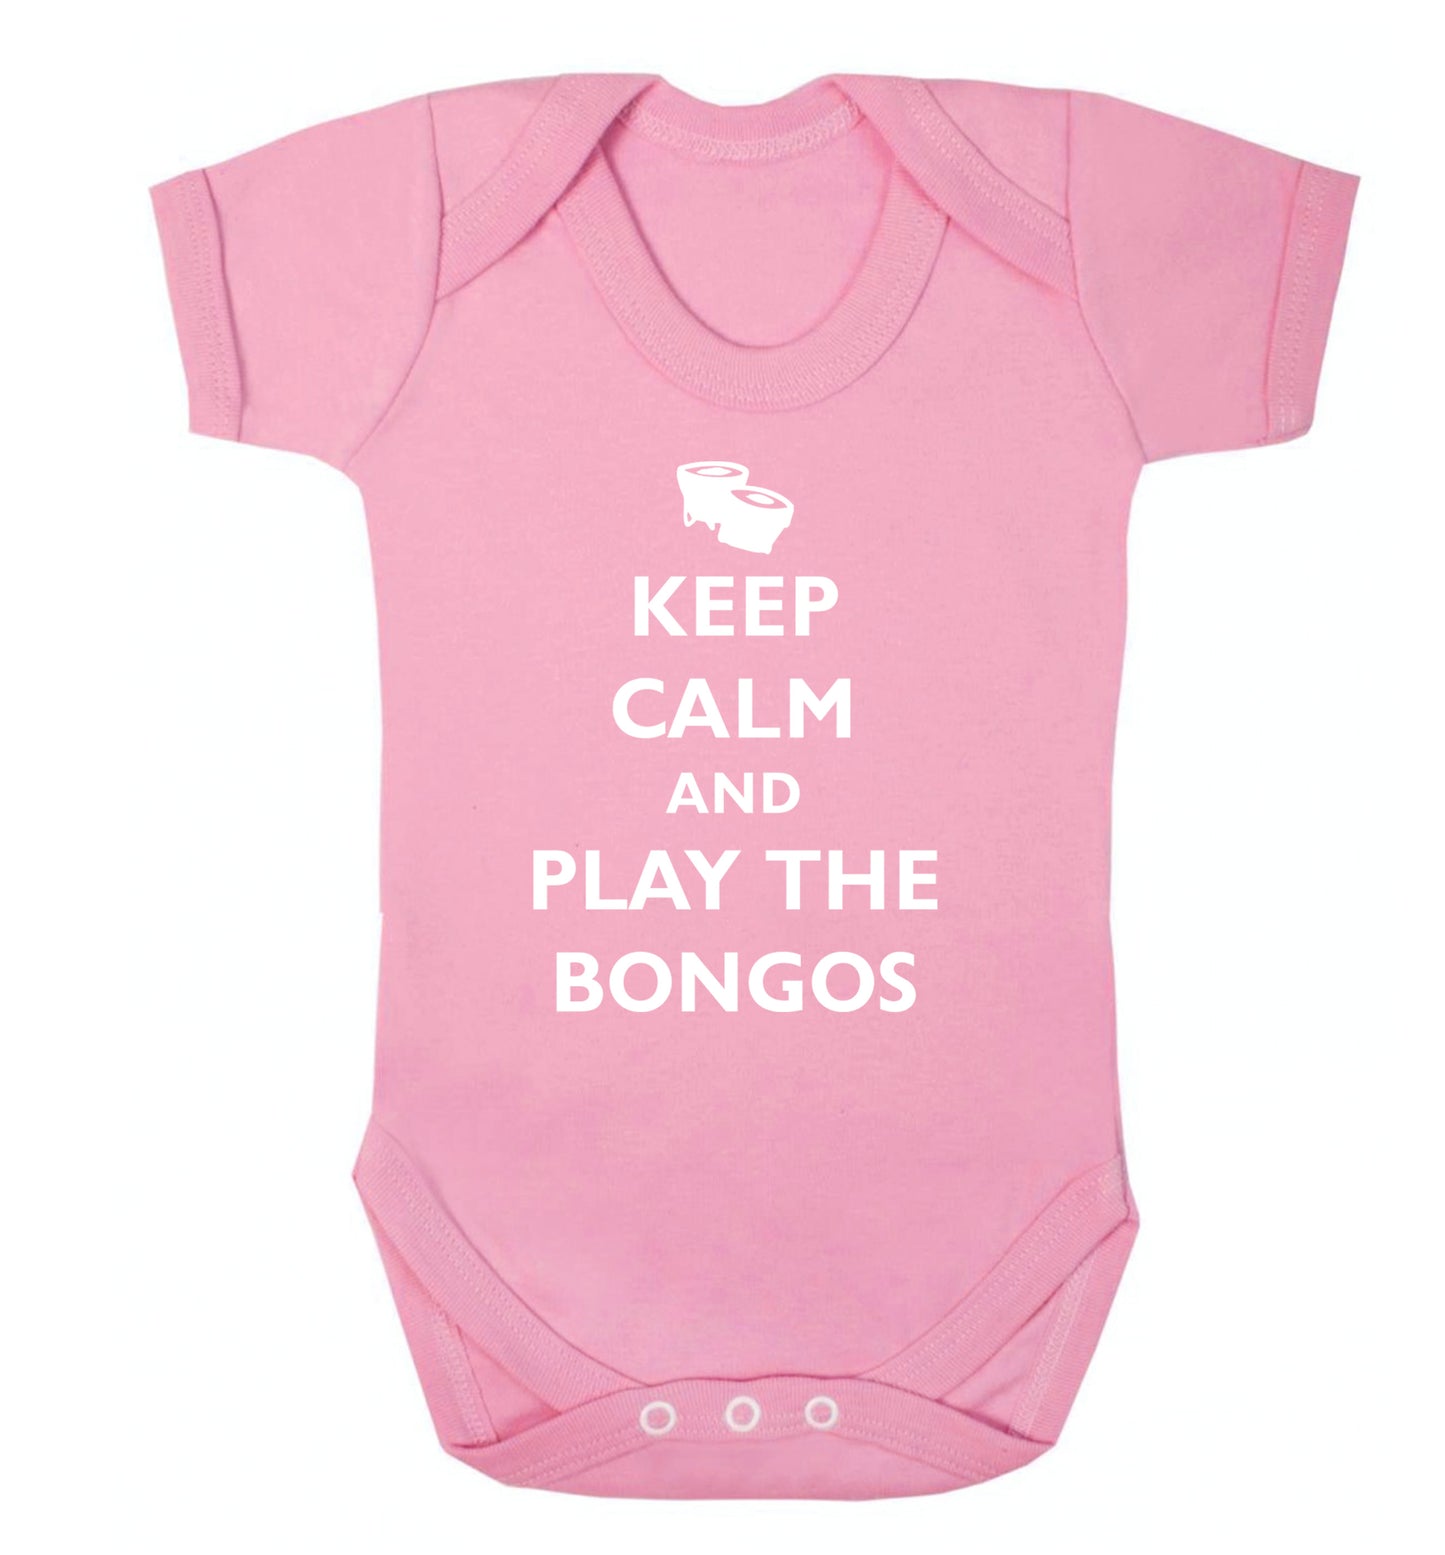 Keep calm and play the bongos Baby Vest pale pink 18-24 months